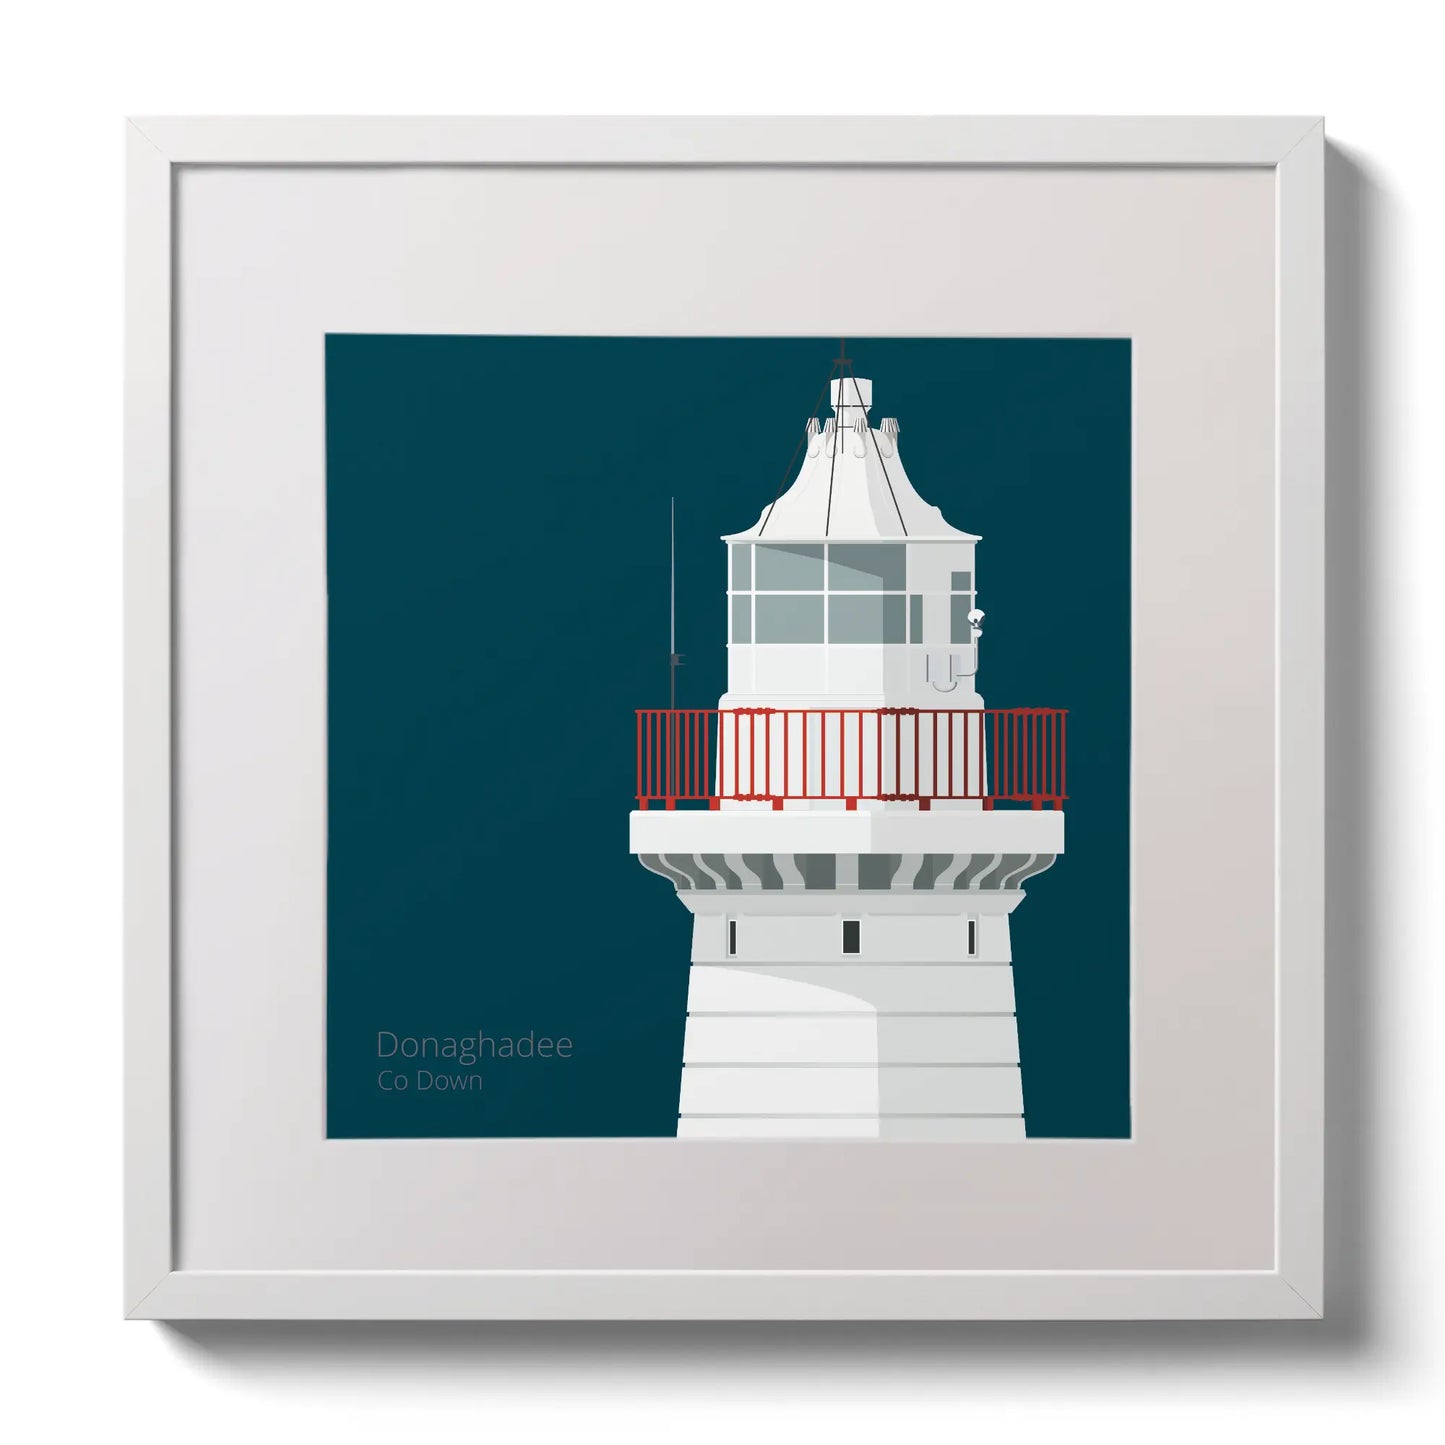 Illustration of Donaghadee lighthouse on a midnight blue background,  in a white square frame measuring 30x30cm.